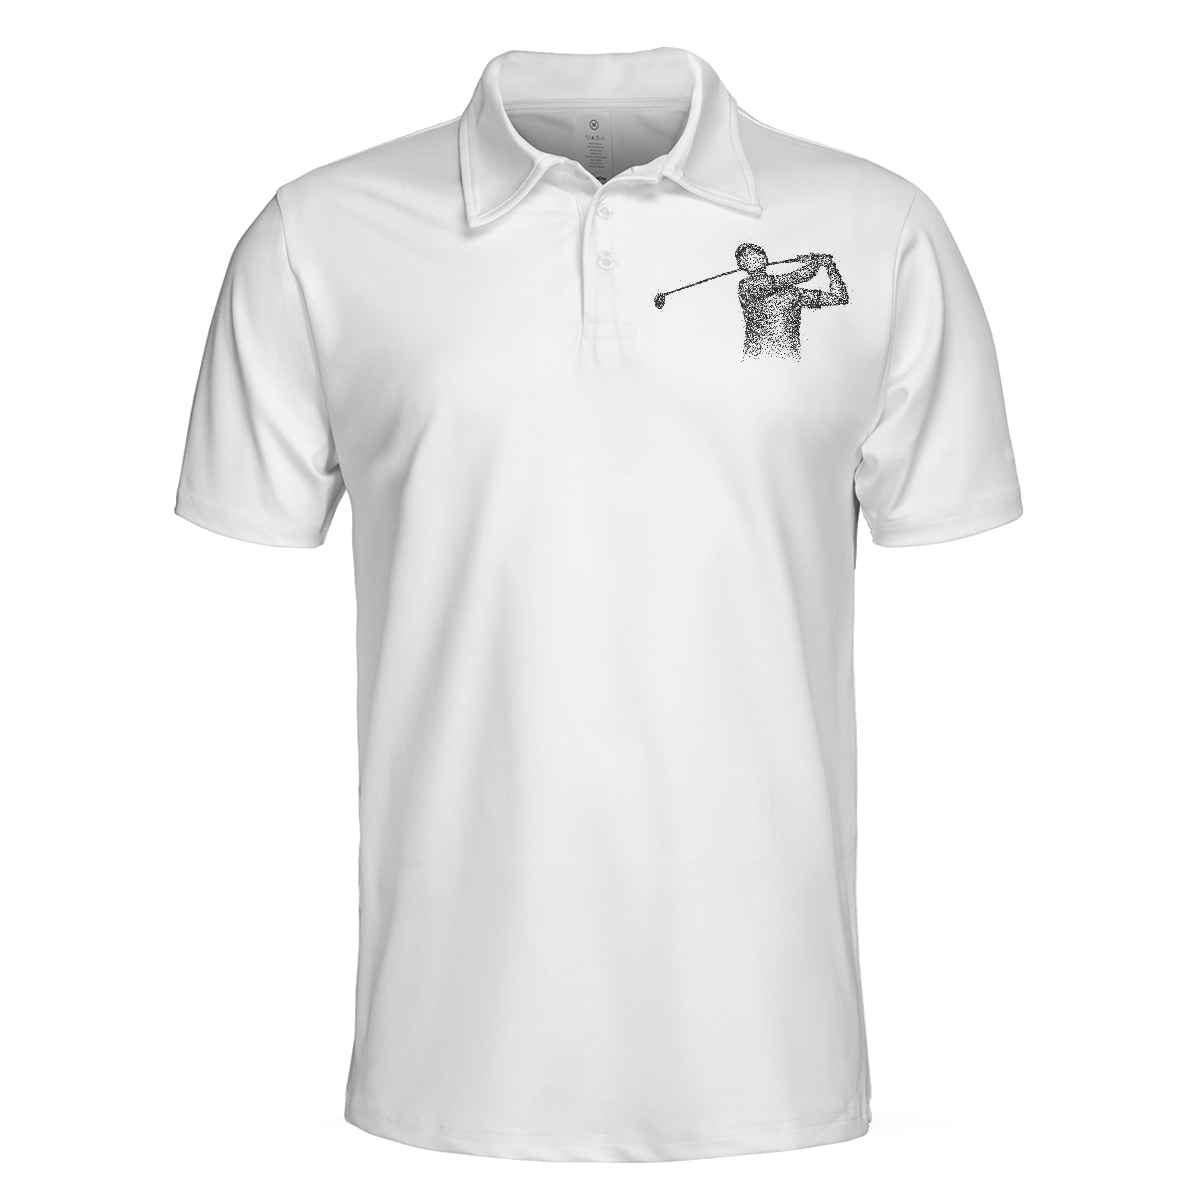 Playing Golf In My Head While Listening To My Wife Polo Shirt For Men Black And White Astronaut Golfer Polo Shirt - 3